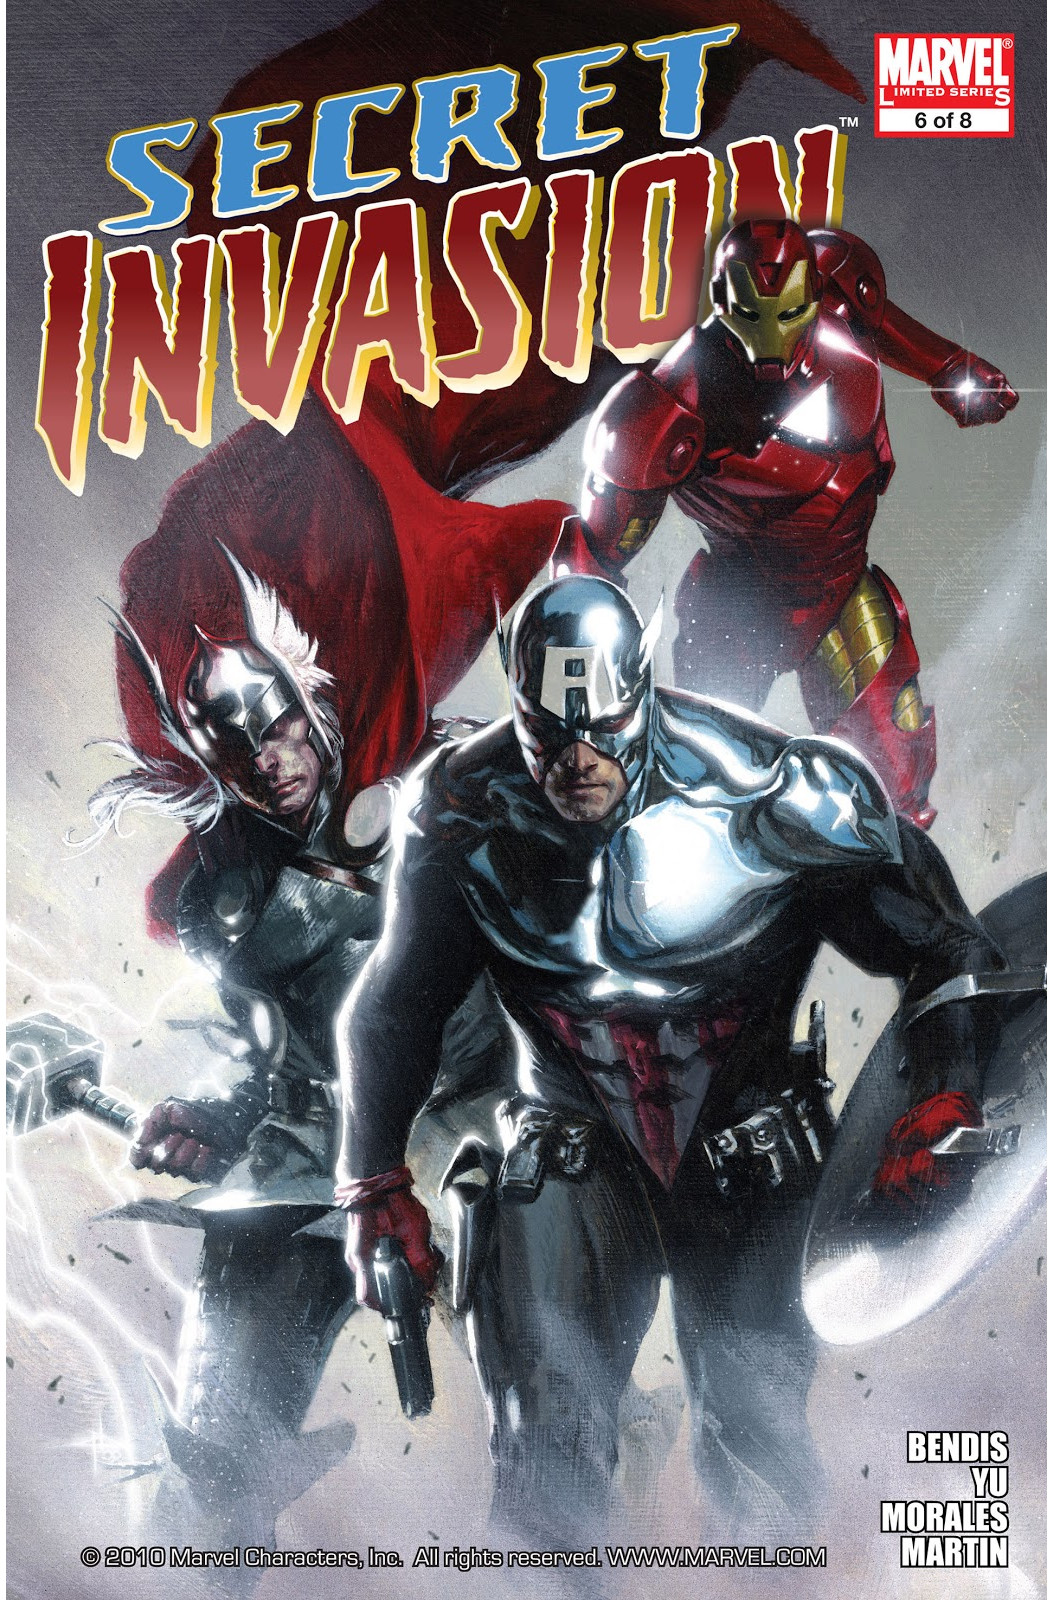 What You Need to Know Before Seeing Marvel's 'Secret Invasion